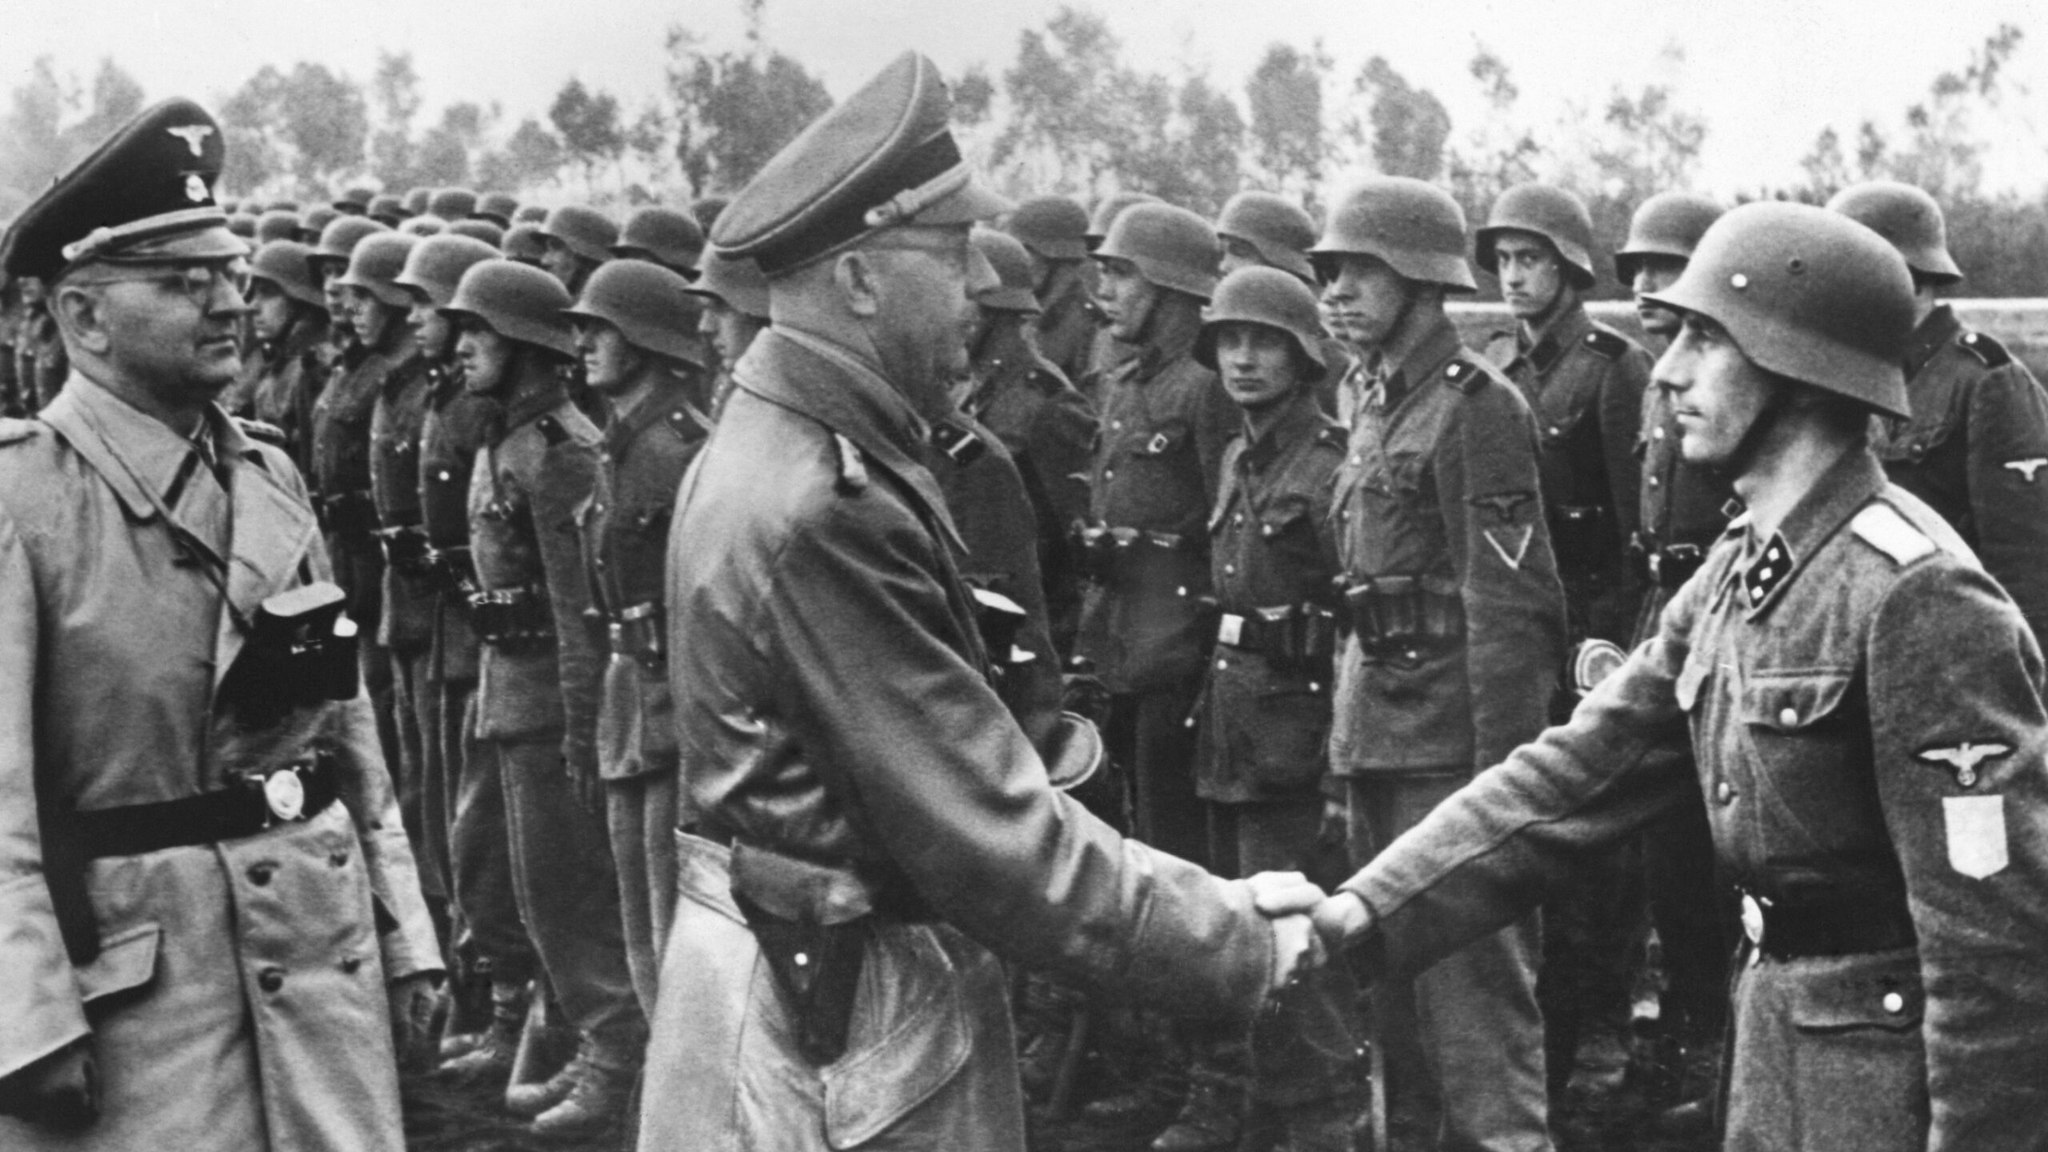 District Galicia Ss Troops Review By Himmler And Dr Wachter In Germany On June 3Rd 1944.